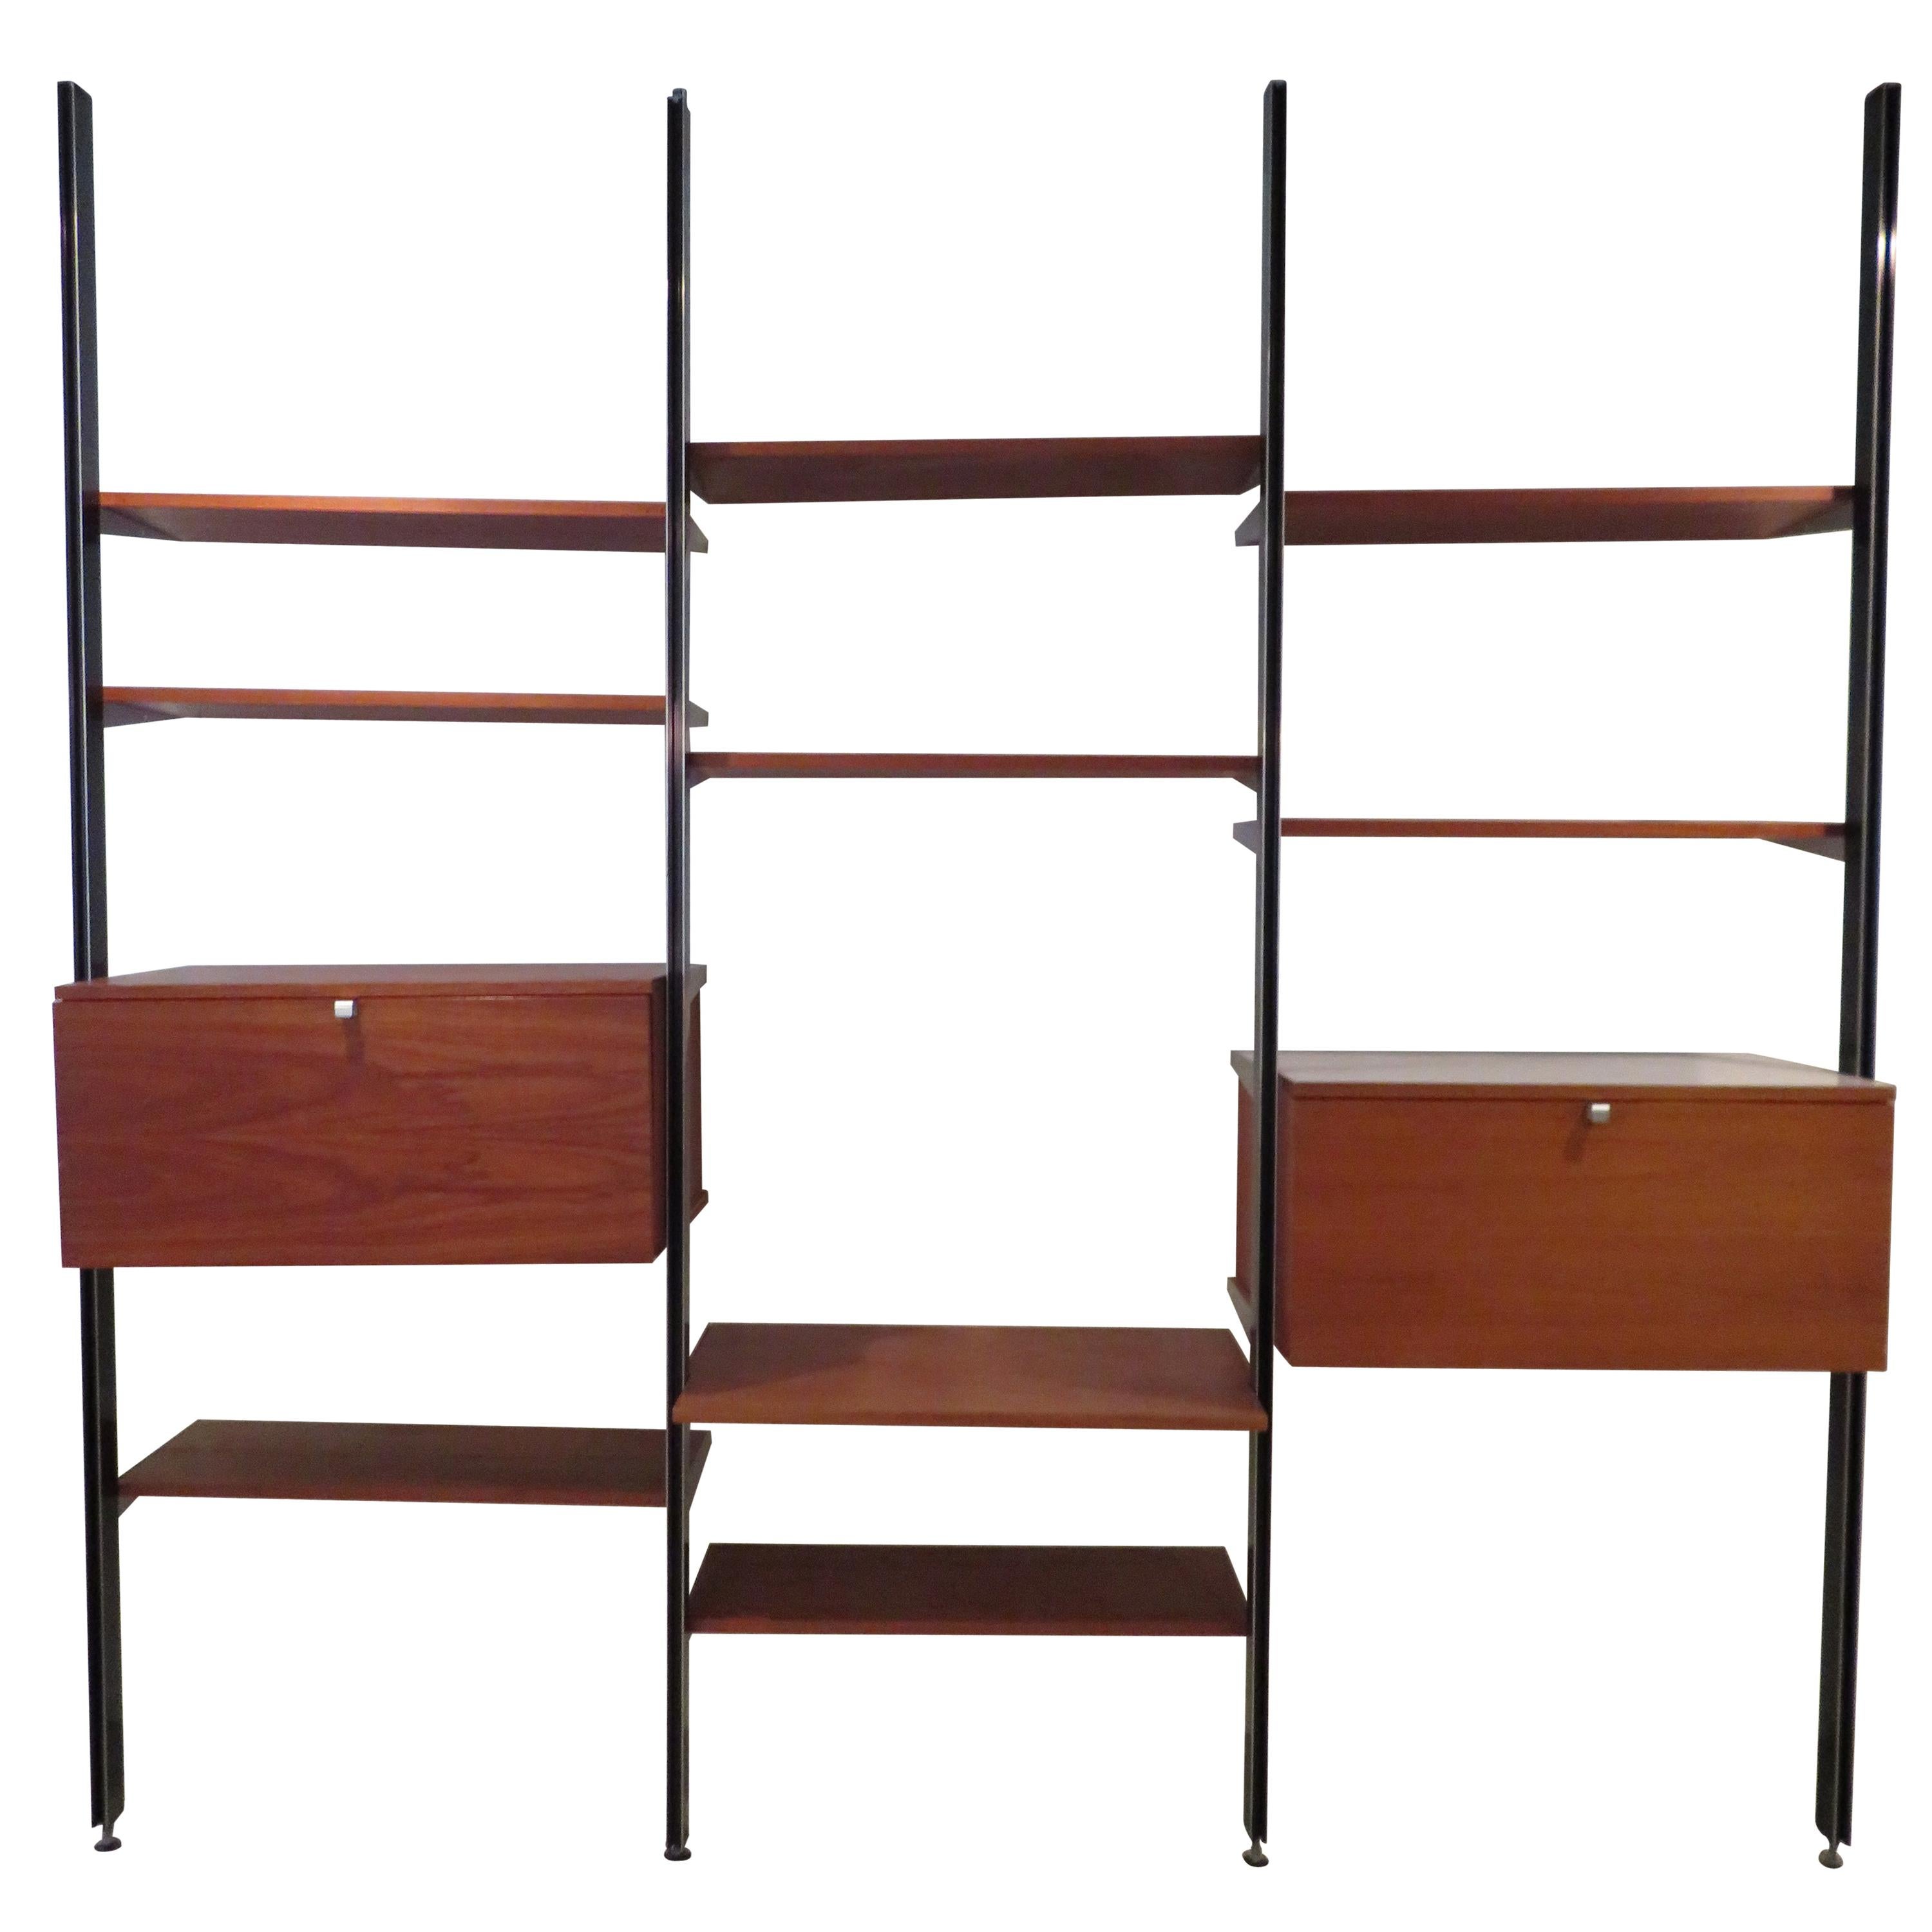 Handsome 3 Bay George Nelson Herman Miller CSS Wall Unit Mid-Century Modern